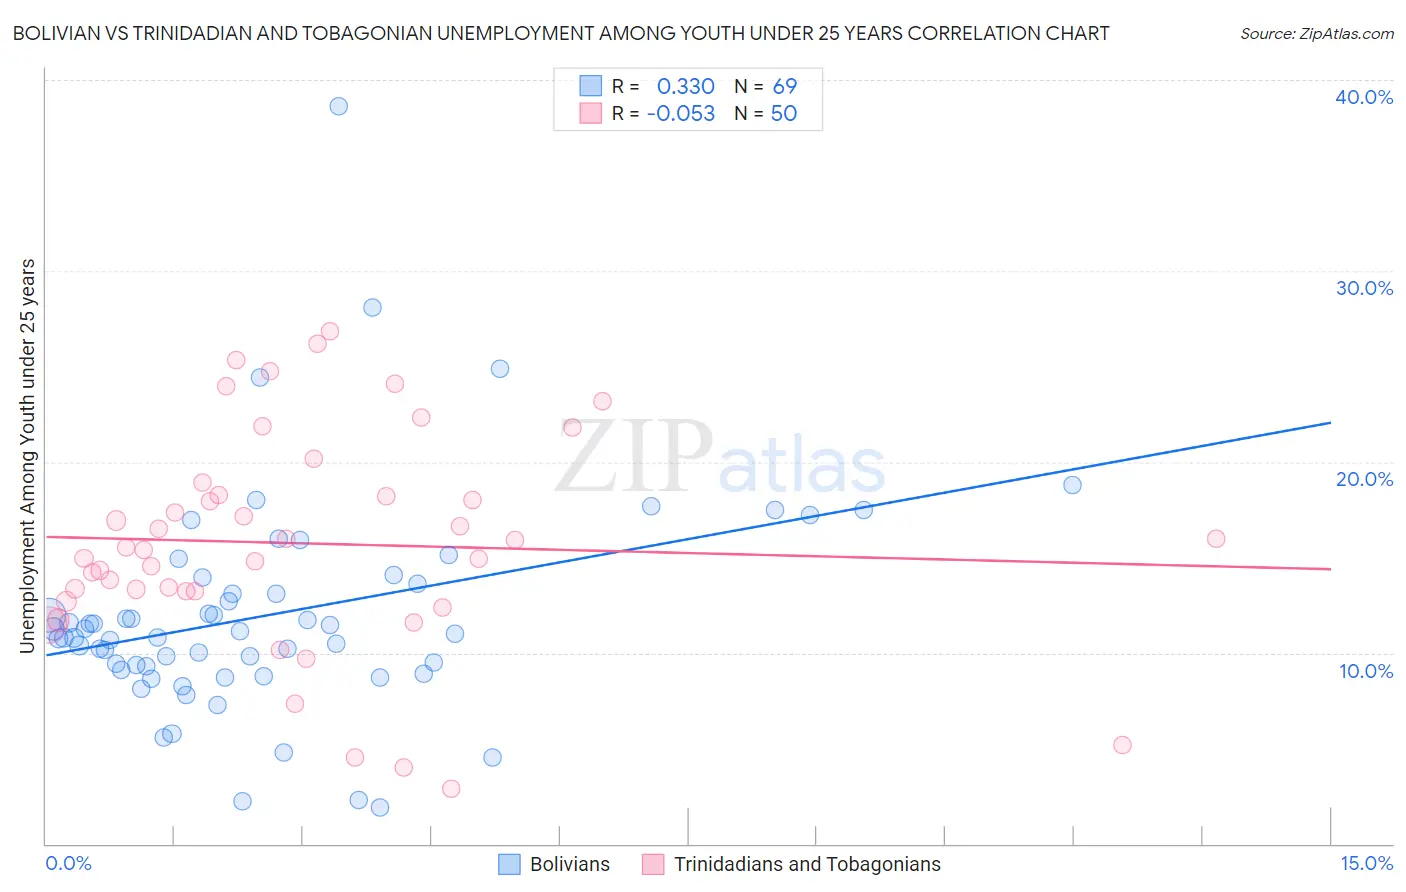 Bolivian vs Trinidadian and Tobagonian Unemployment Among Youth under 25 years